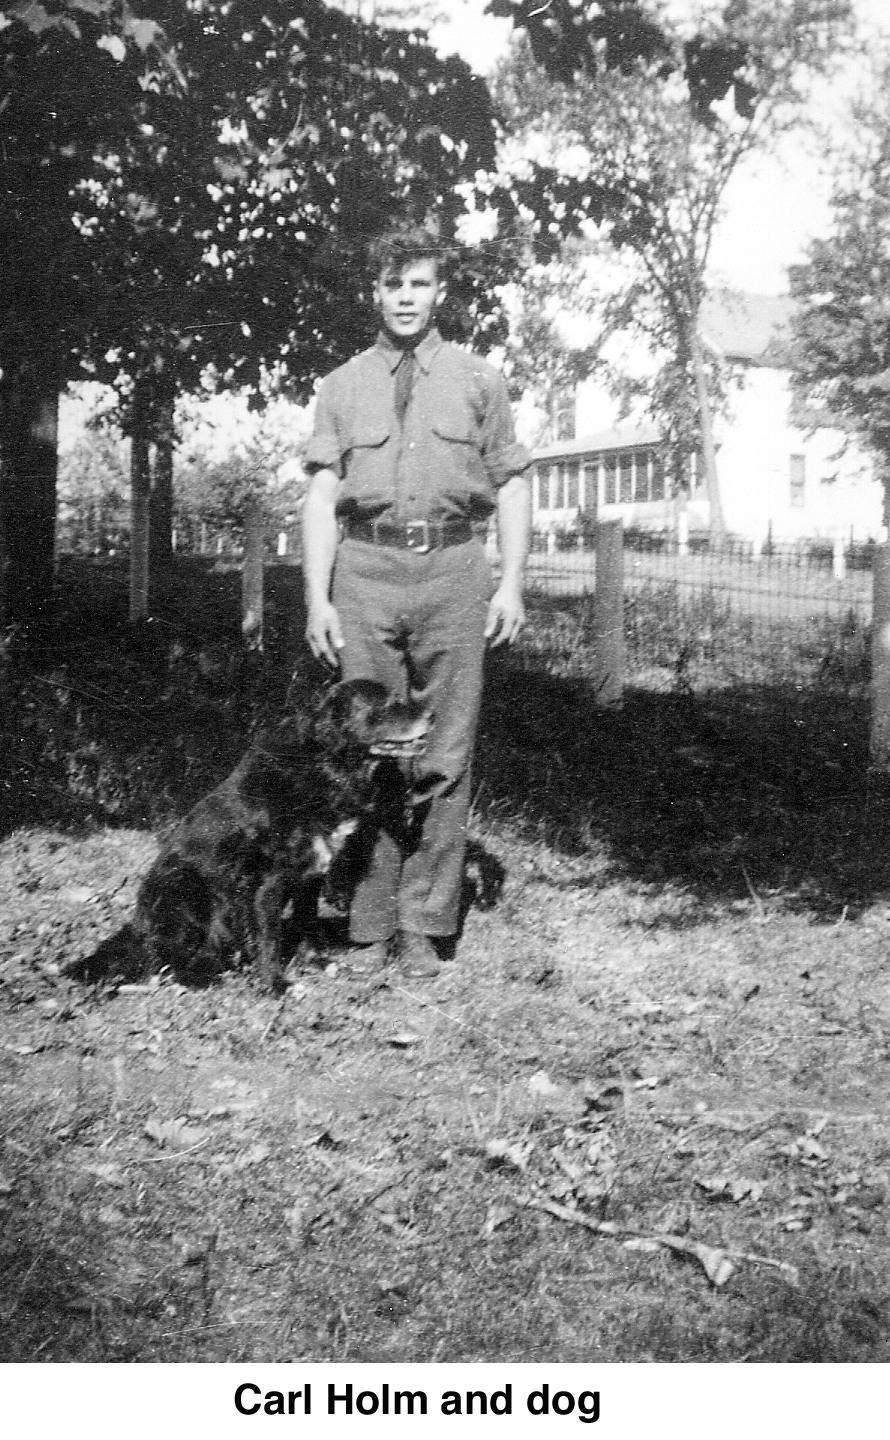 Carl Holm with a dog